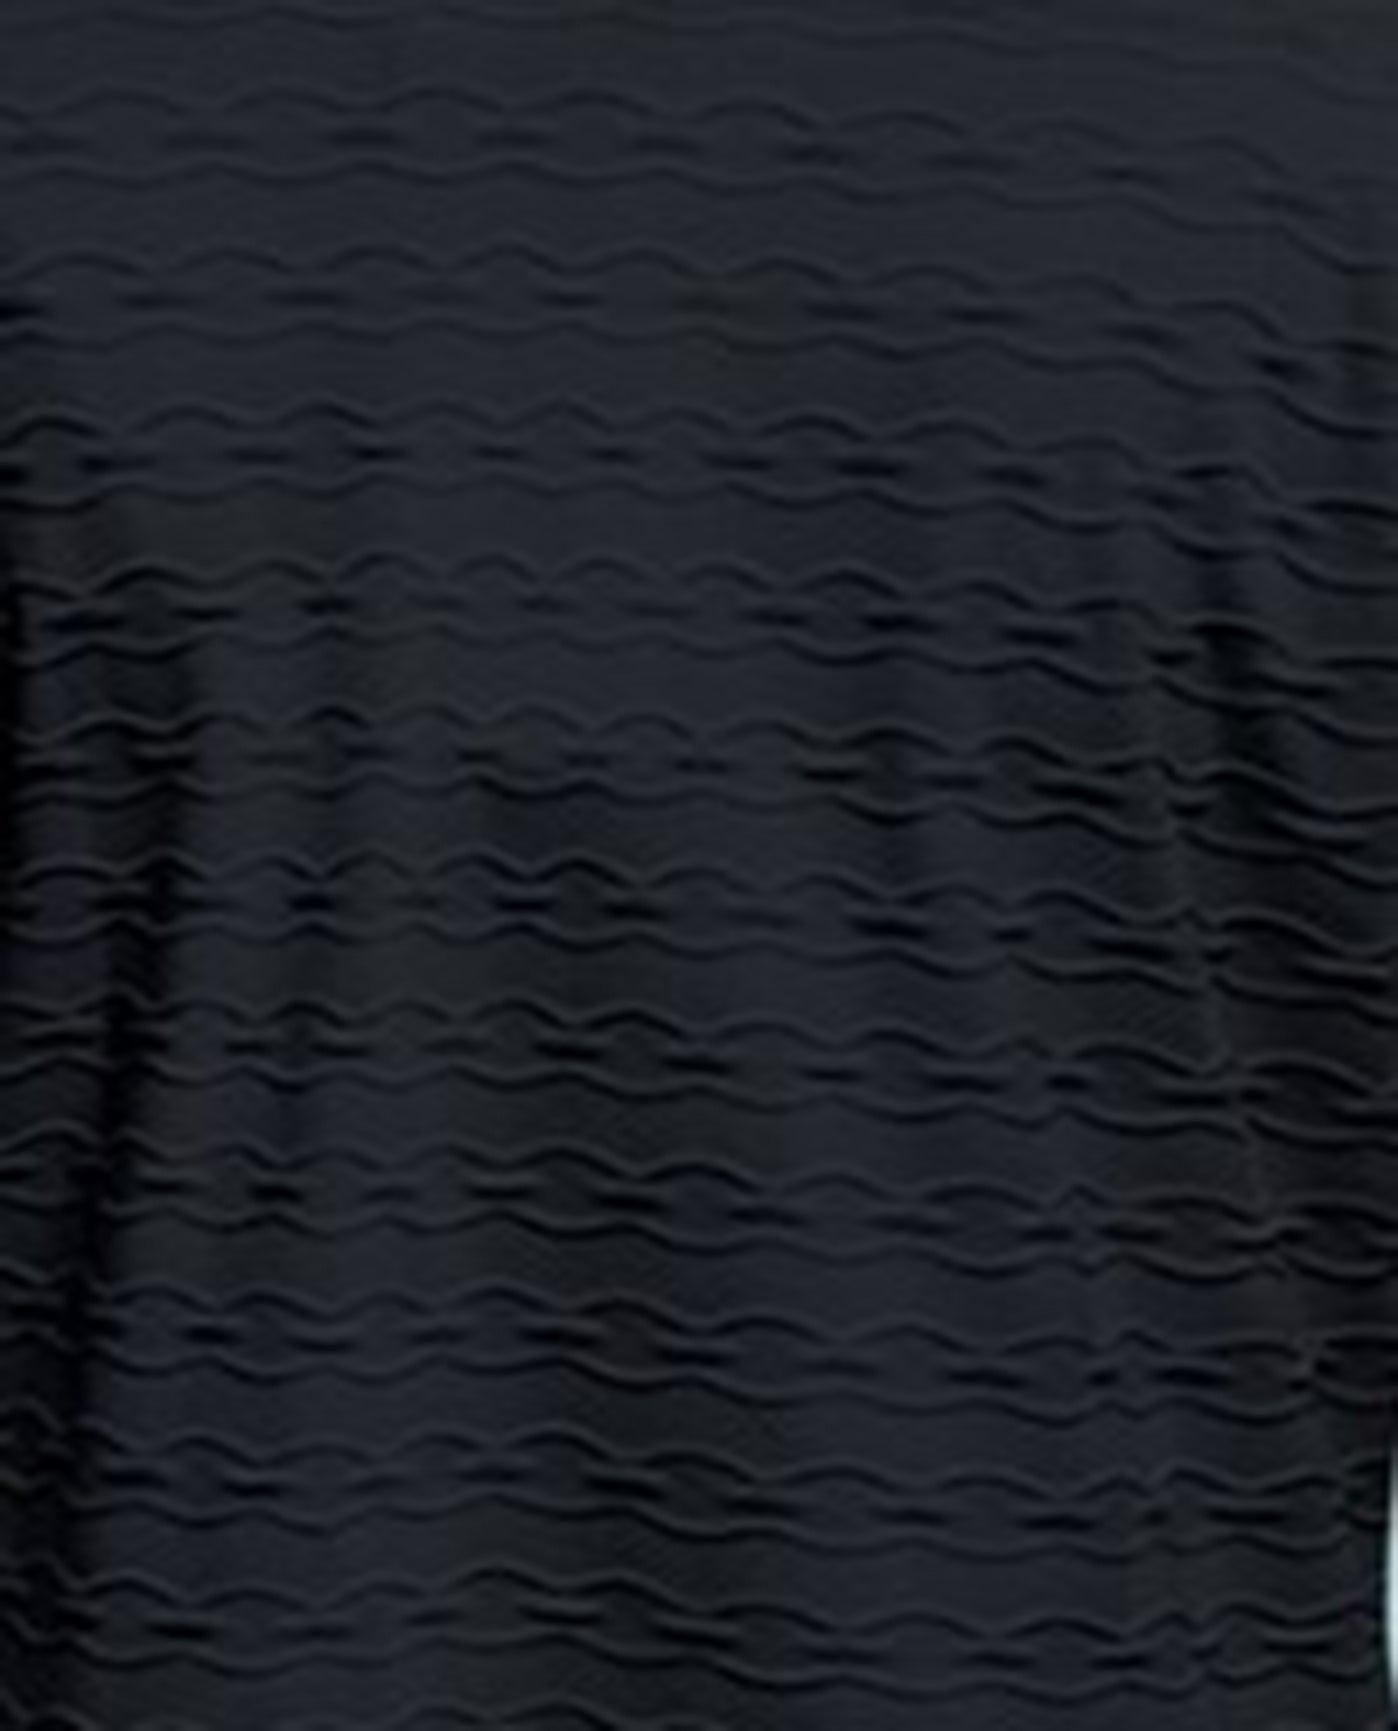 FABRIC SWATCH VIEW OF AQUAMORE SOLID TEXTURED CAP SLEEVE BUTTON UP COVER UP TUNIC | 017 AQM TEXTURED BLACK